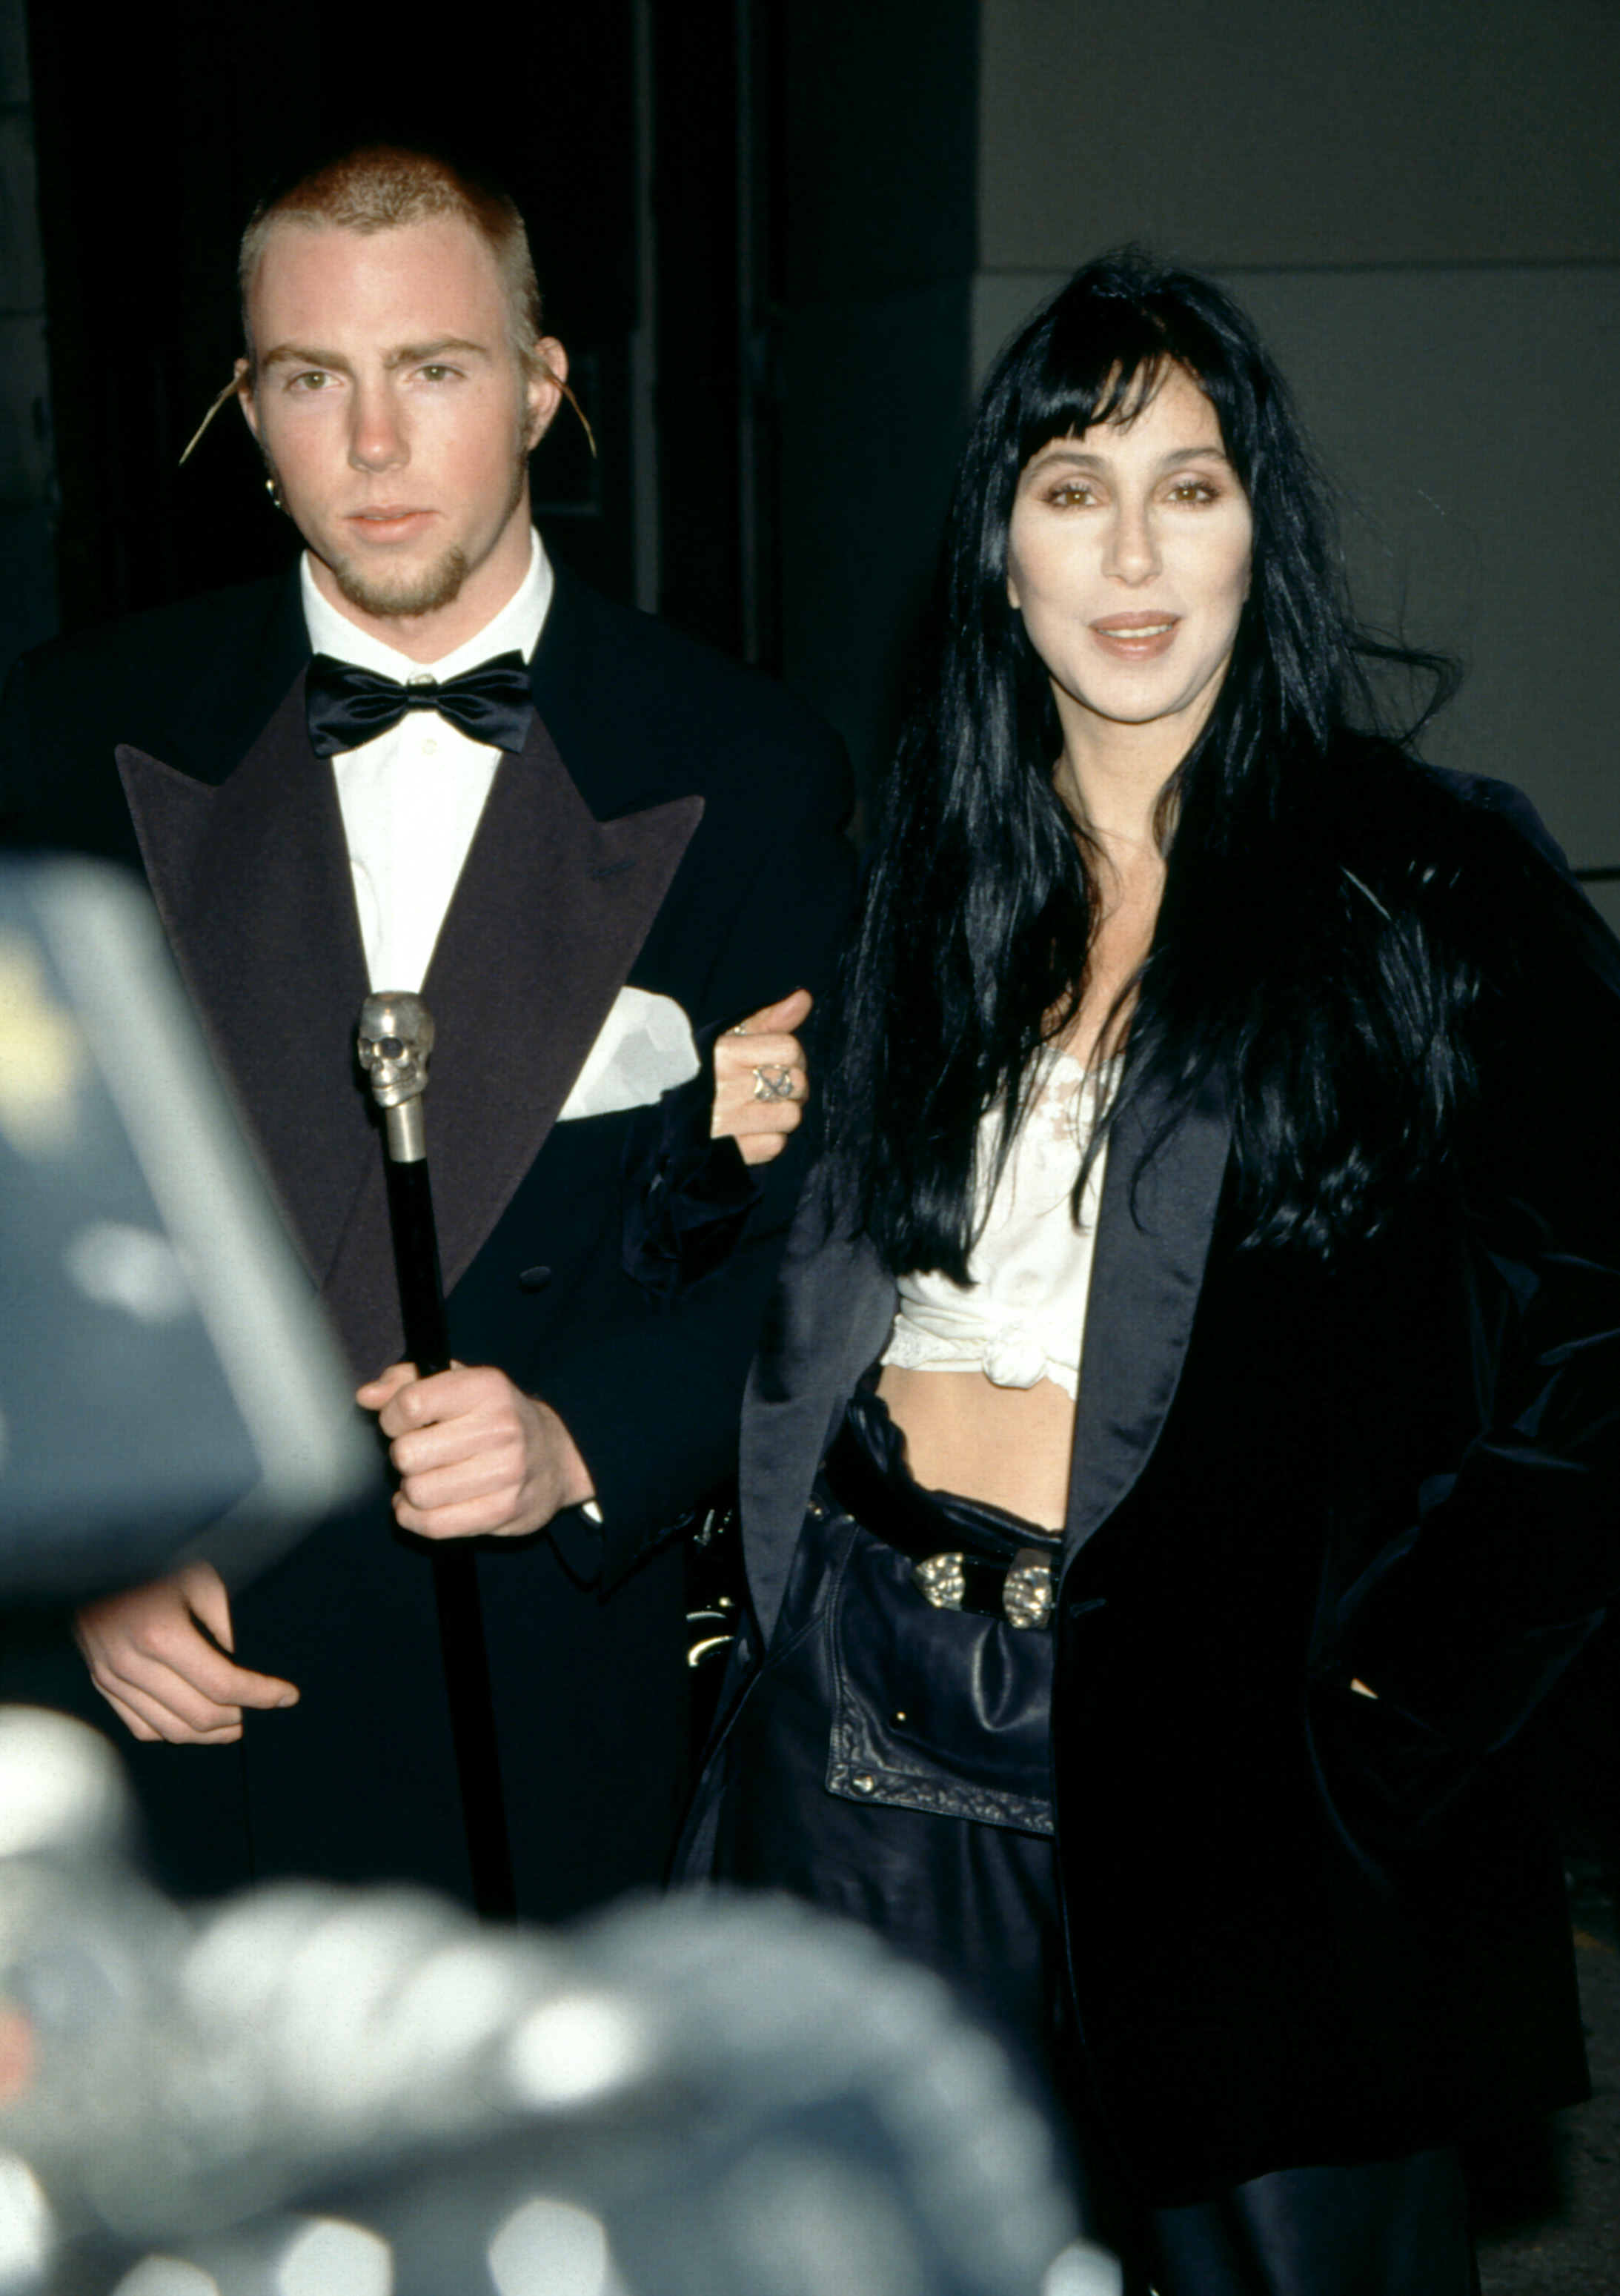 Elijah Blue Allman and Cher attend the 5th Annual Fire and Ice Ball to Benefit Revlon UCLA Women Cancer Center in Century City, California on December 7, 1994. | Source: Getty Images